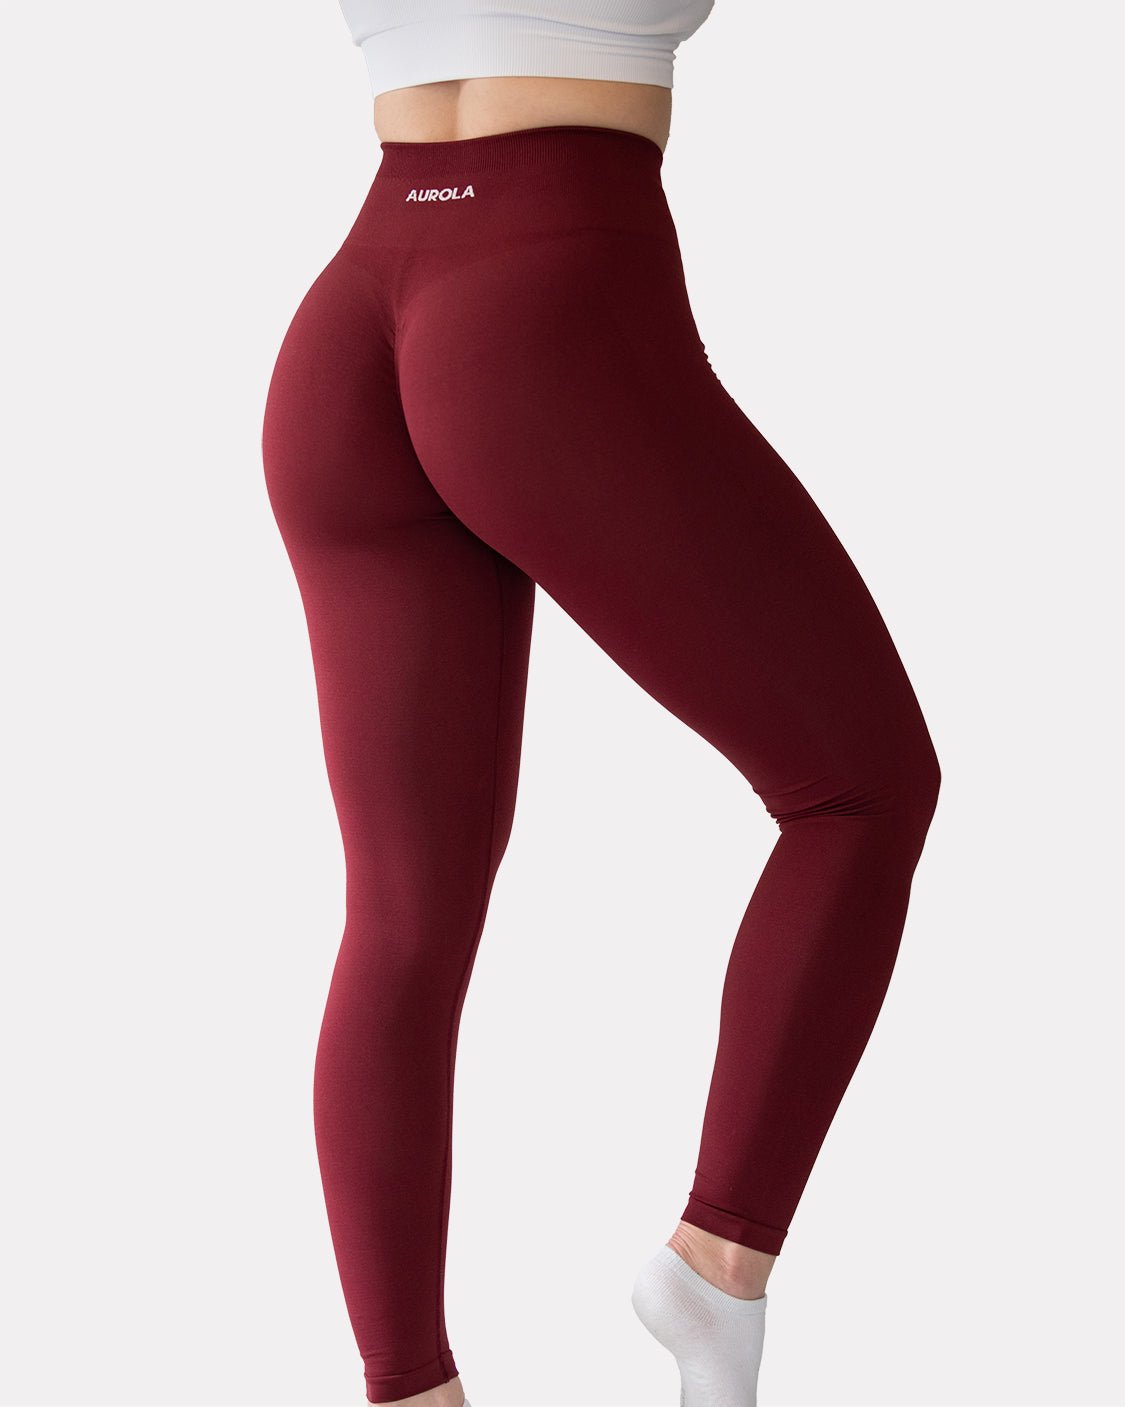 Comprar AUROLA Power Workout Leggings for Women Tummy Control Squat Proof  Ribbed Thick Seamless Scrunch Active Pants en USA desde Costa Rica